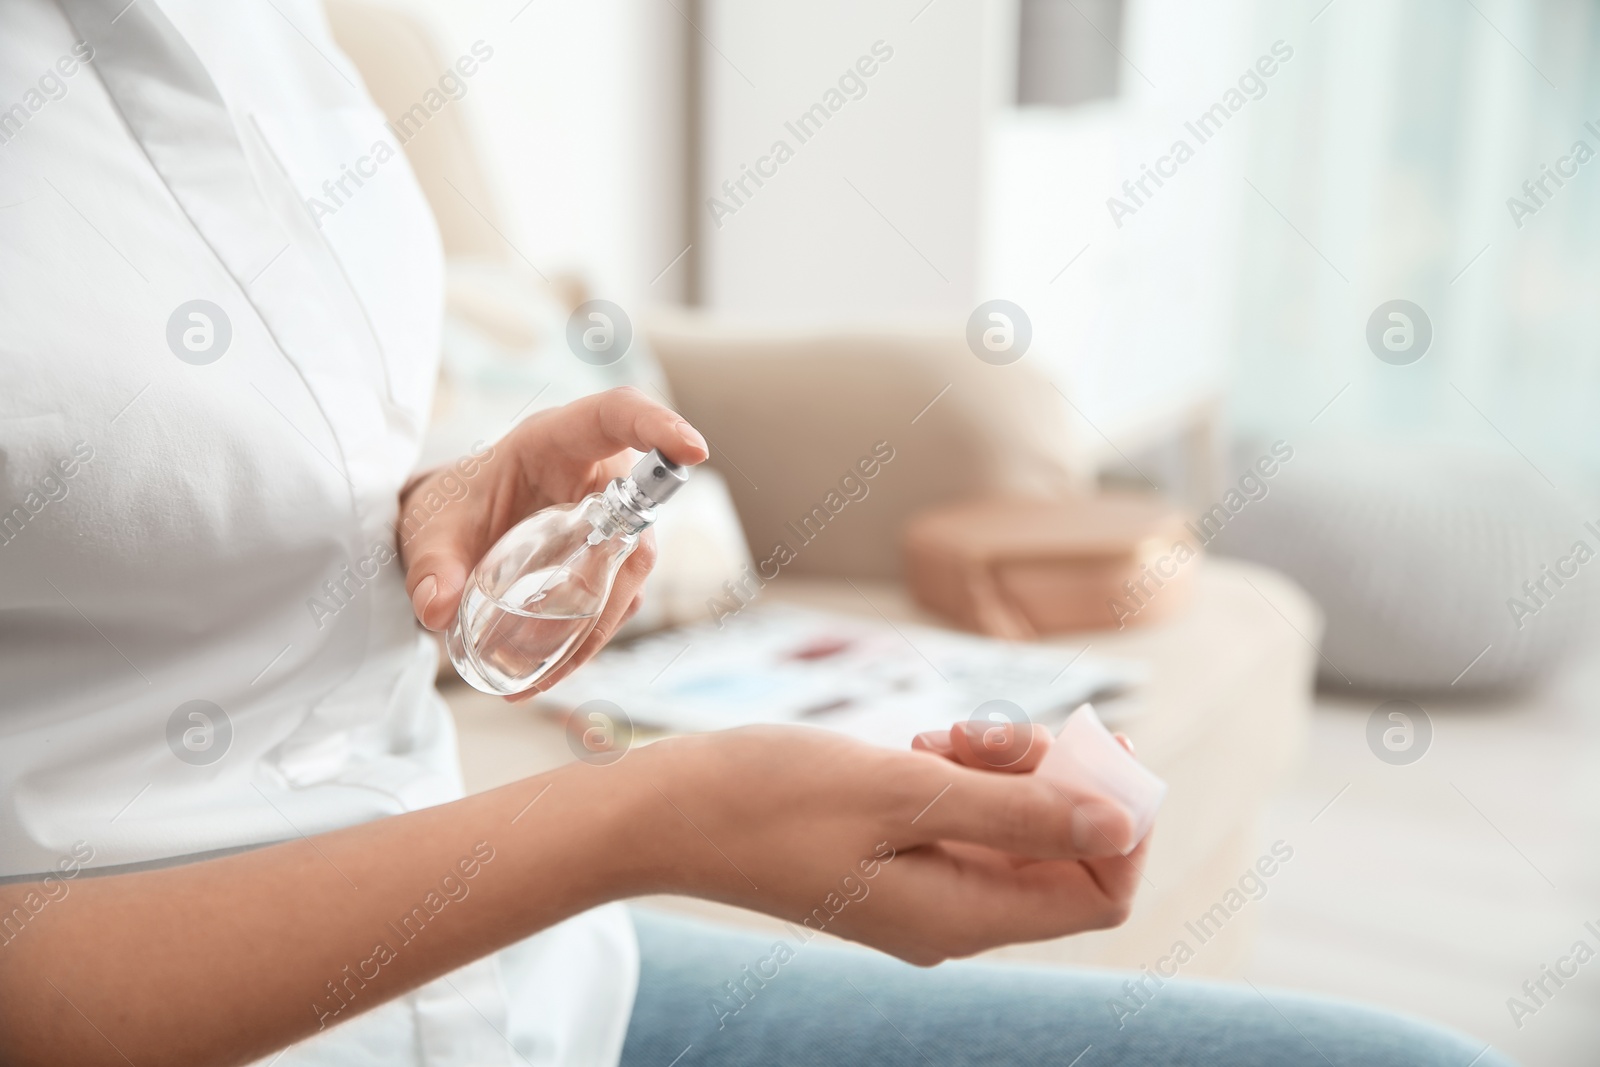 Photo of Young woman using perfume indoors, closeup. Space for text